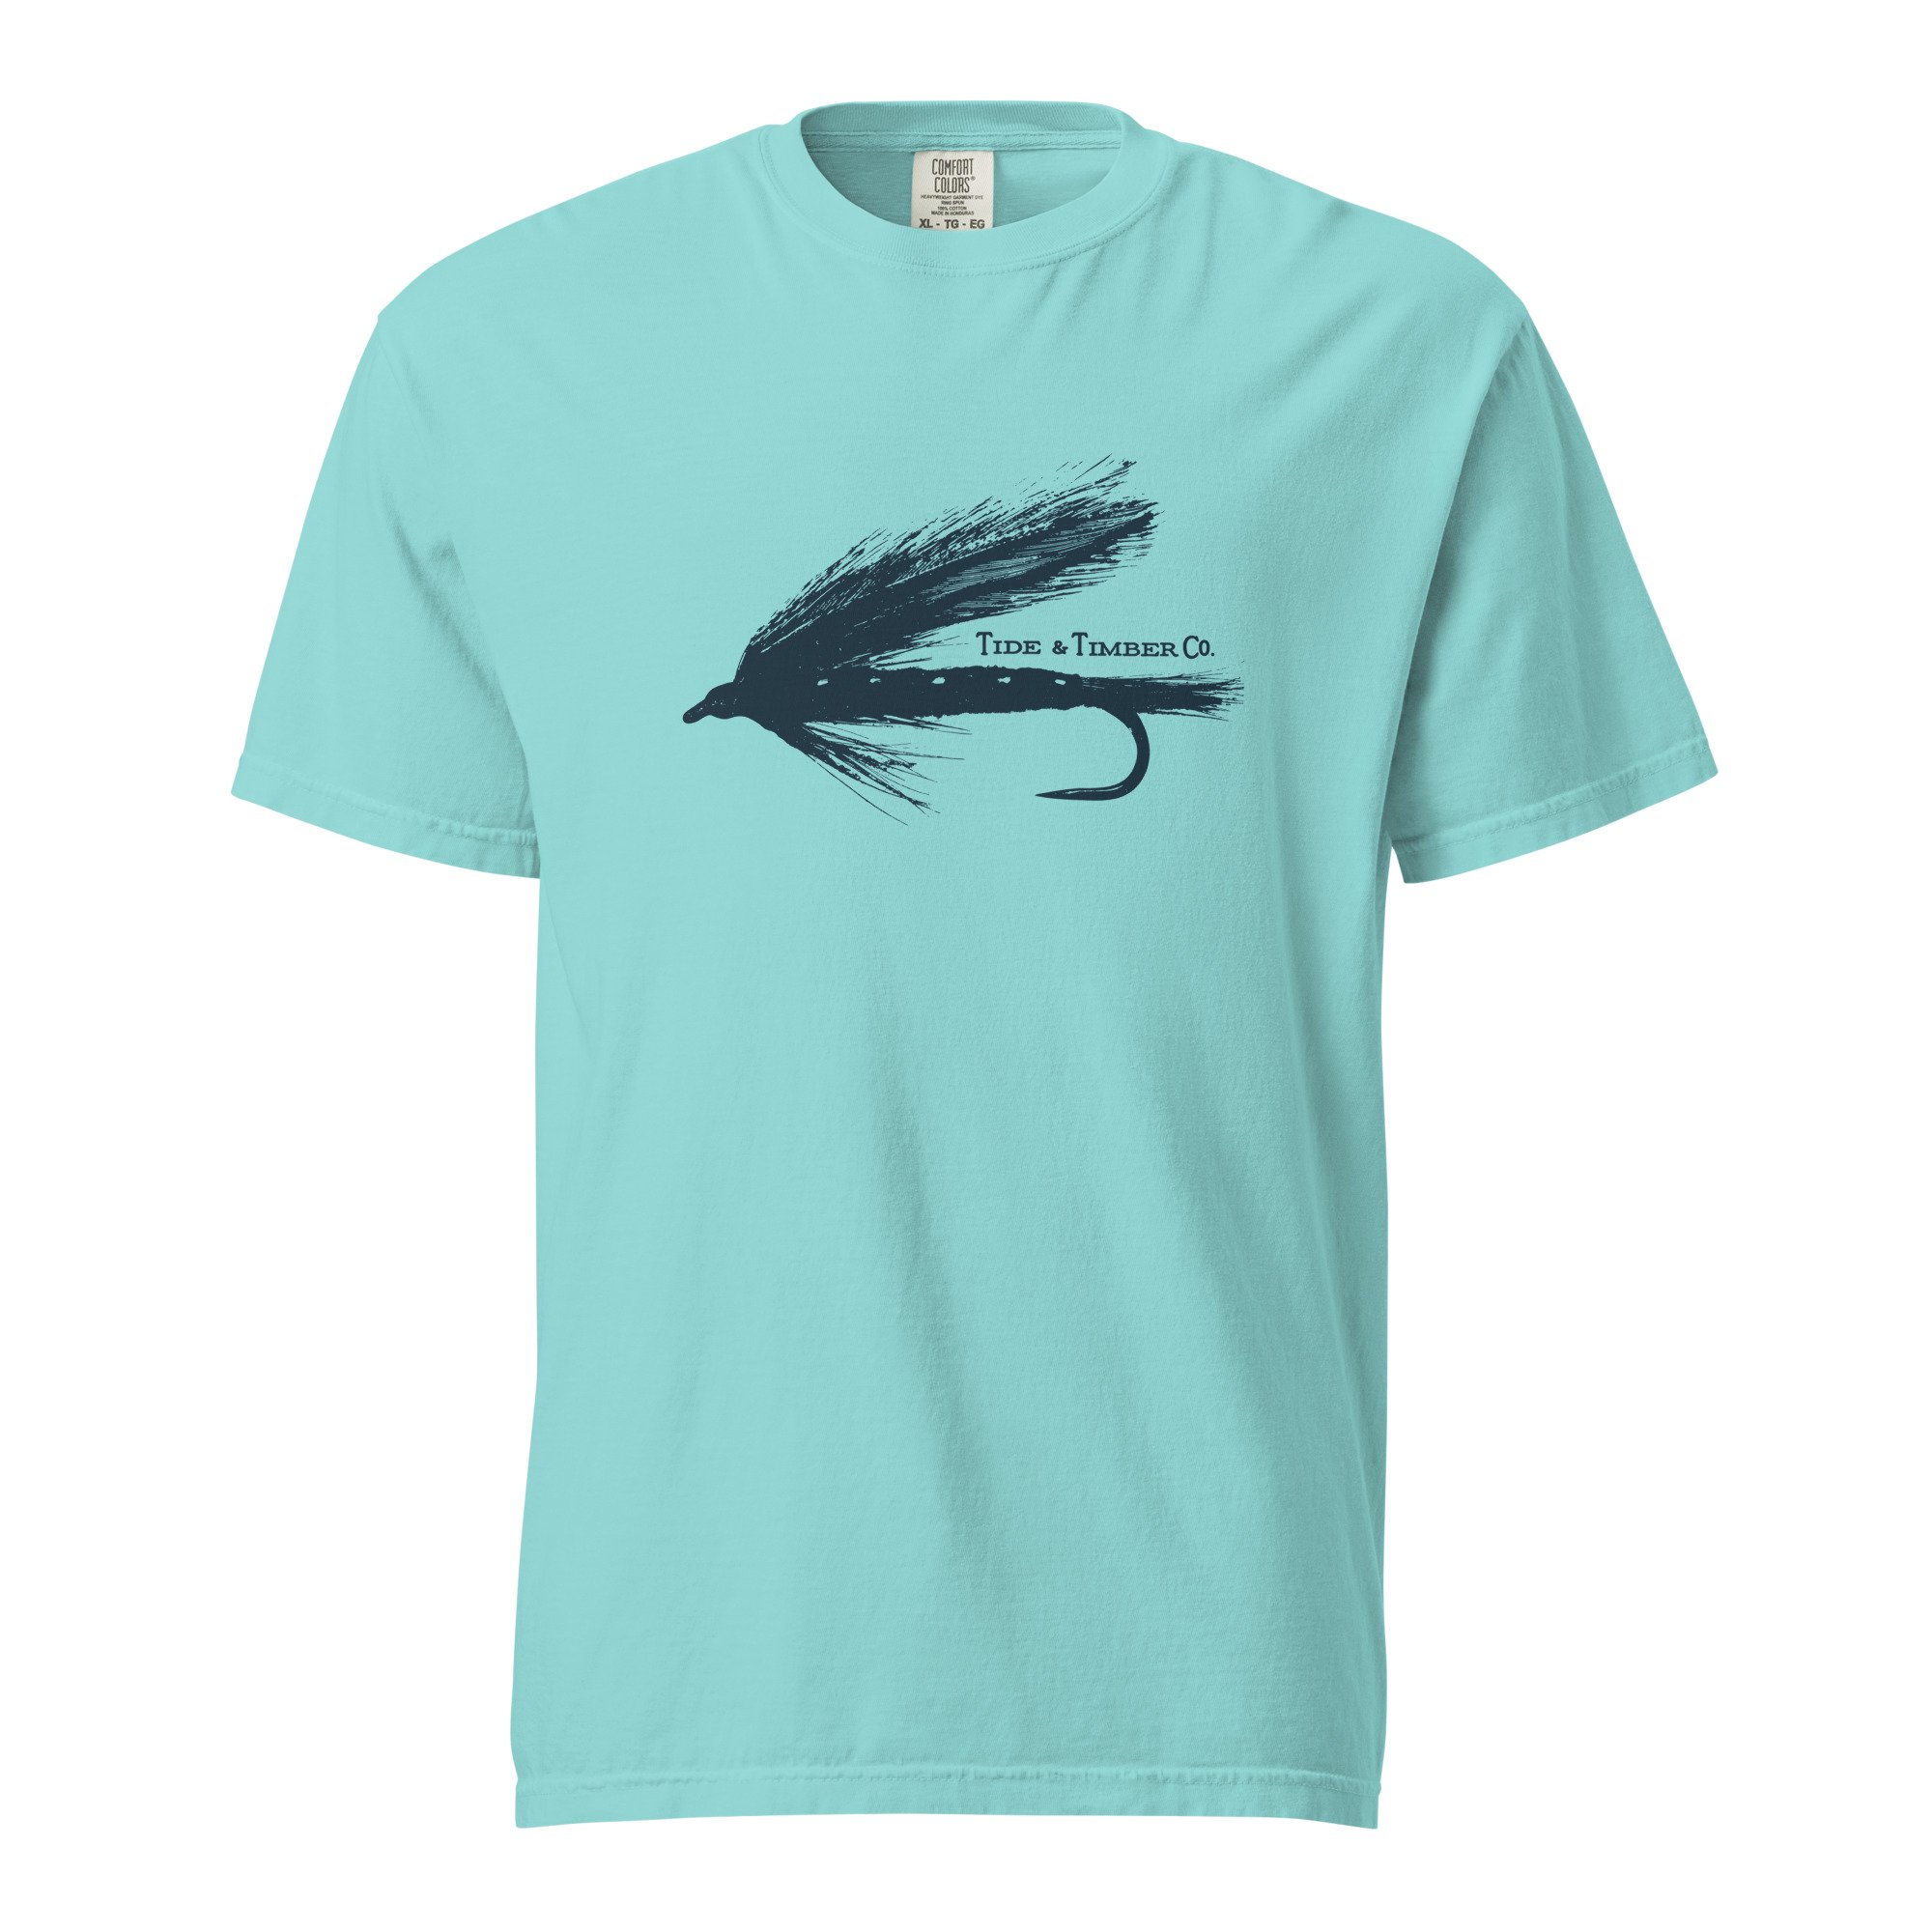 Tide & Timber Co. Black Ghost Fly Fishing - Unisex garment-dyed heavyweight  t-shirt